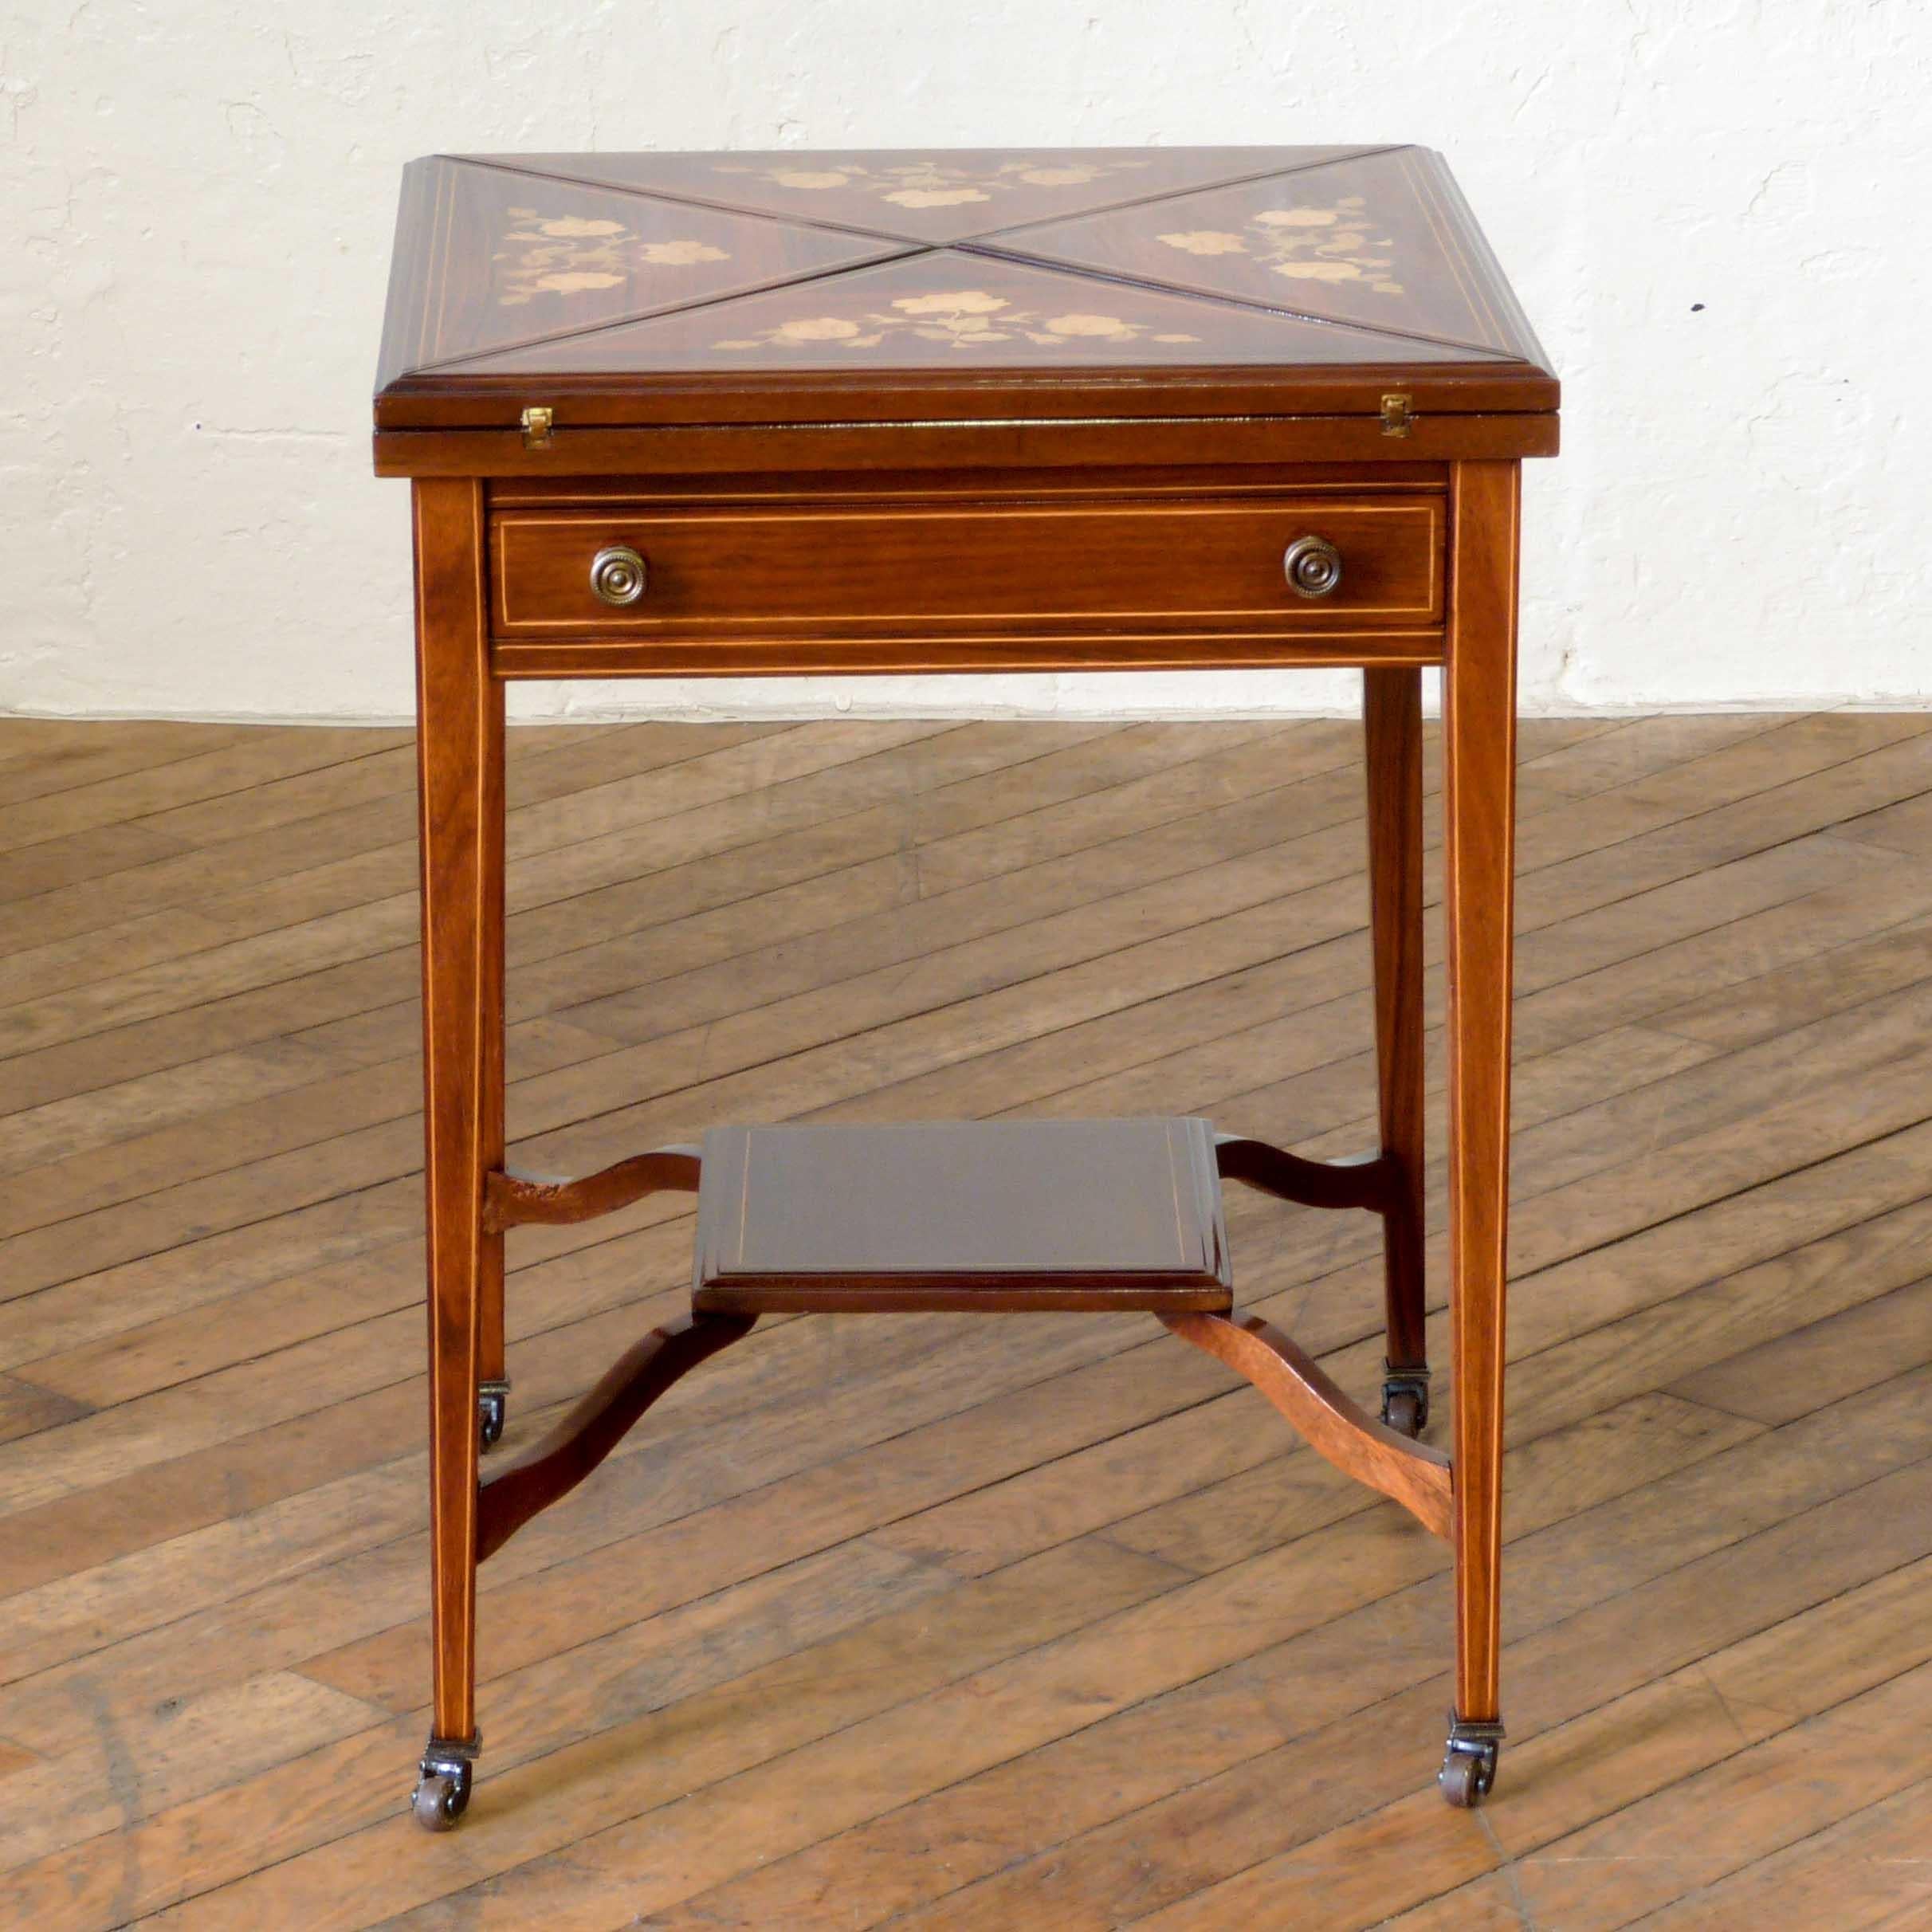 A lovely Edwardian mahogany card table of the envelope design. When opened it displays a baize surface to the centre and dished compartments. Sat on four legs with boxwood inlaid stringing, the original castors still evident, plus the stretchered